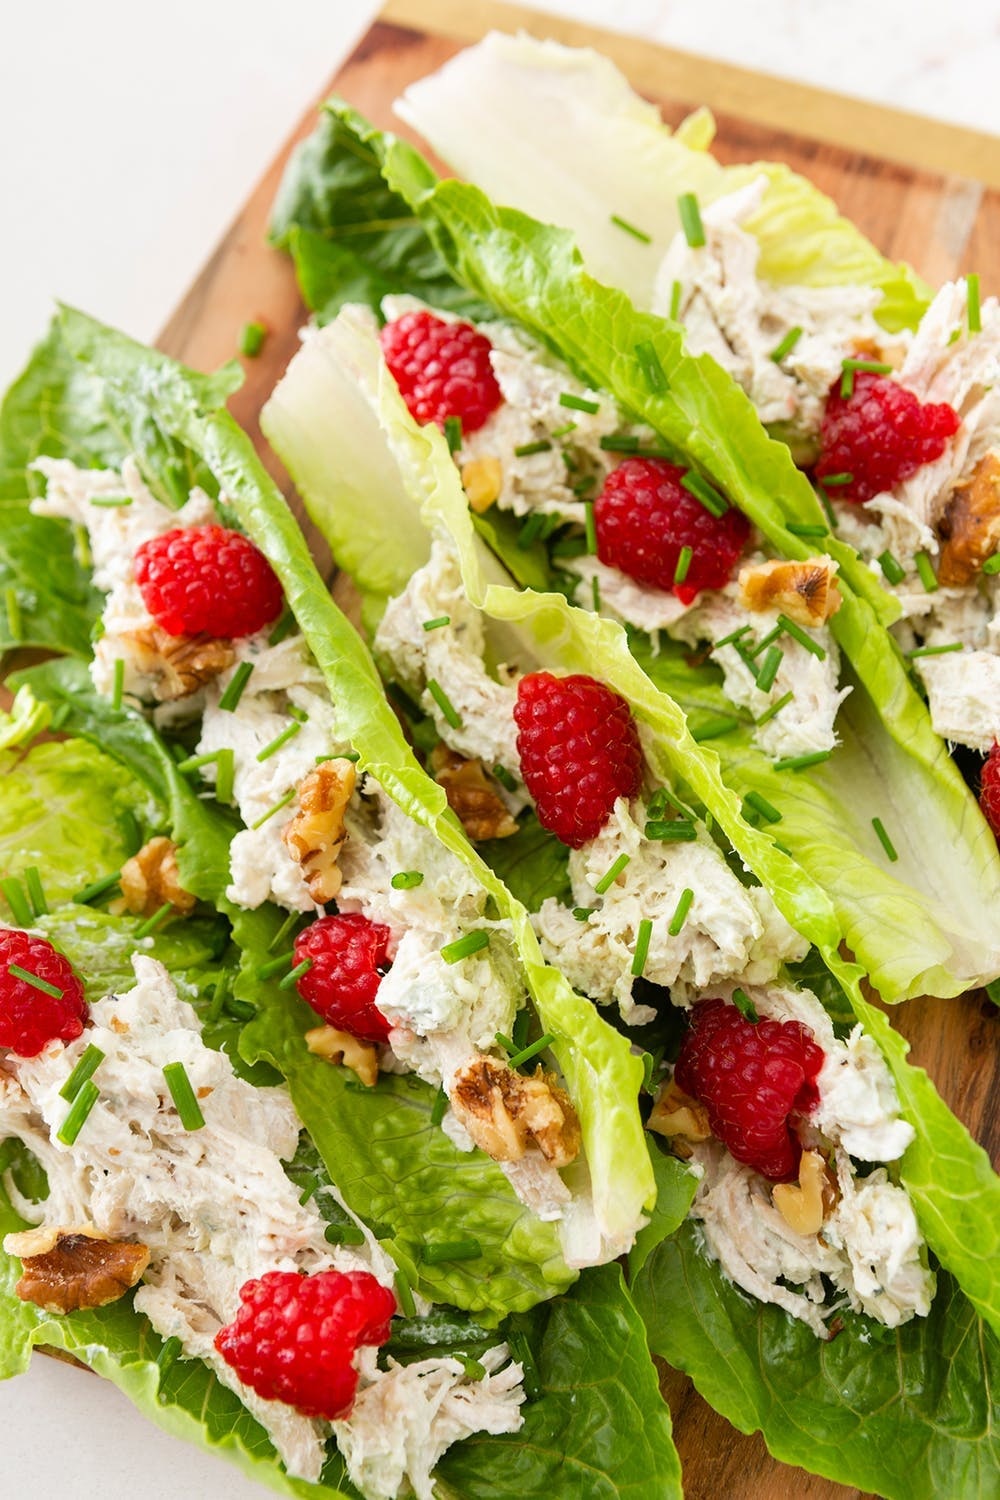 This handheld take on chicken salad will please your tummy <em>and</em> your carb count. (via <strong><a href="https://www.brit.co/keto-chicken-salad-lettuce-wraps/">Brit + Co.</a></strong>)